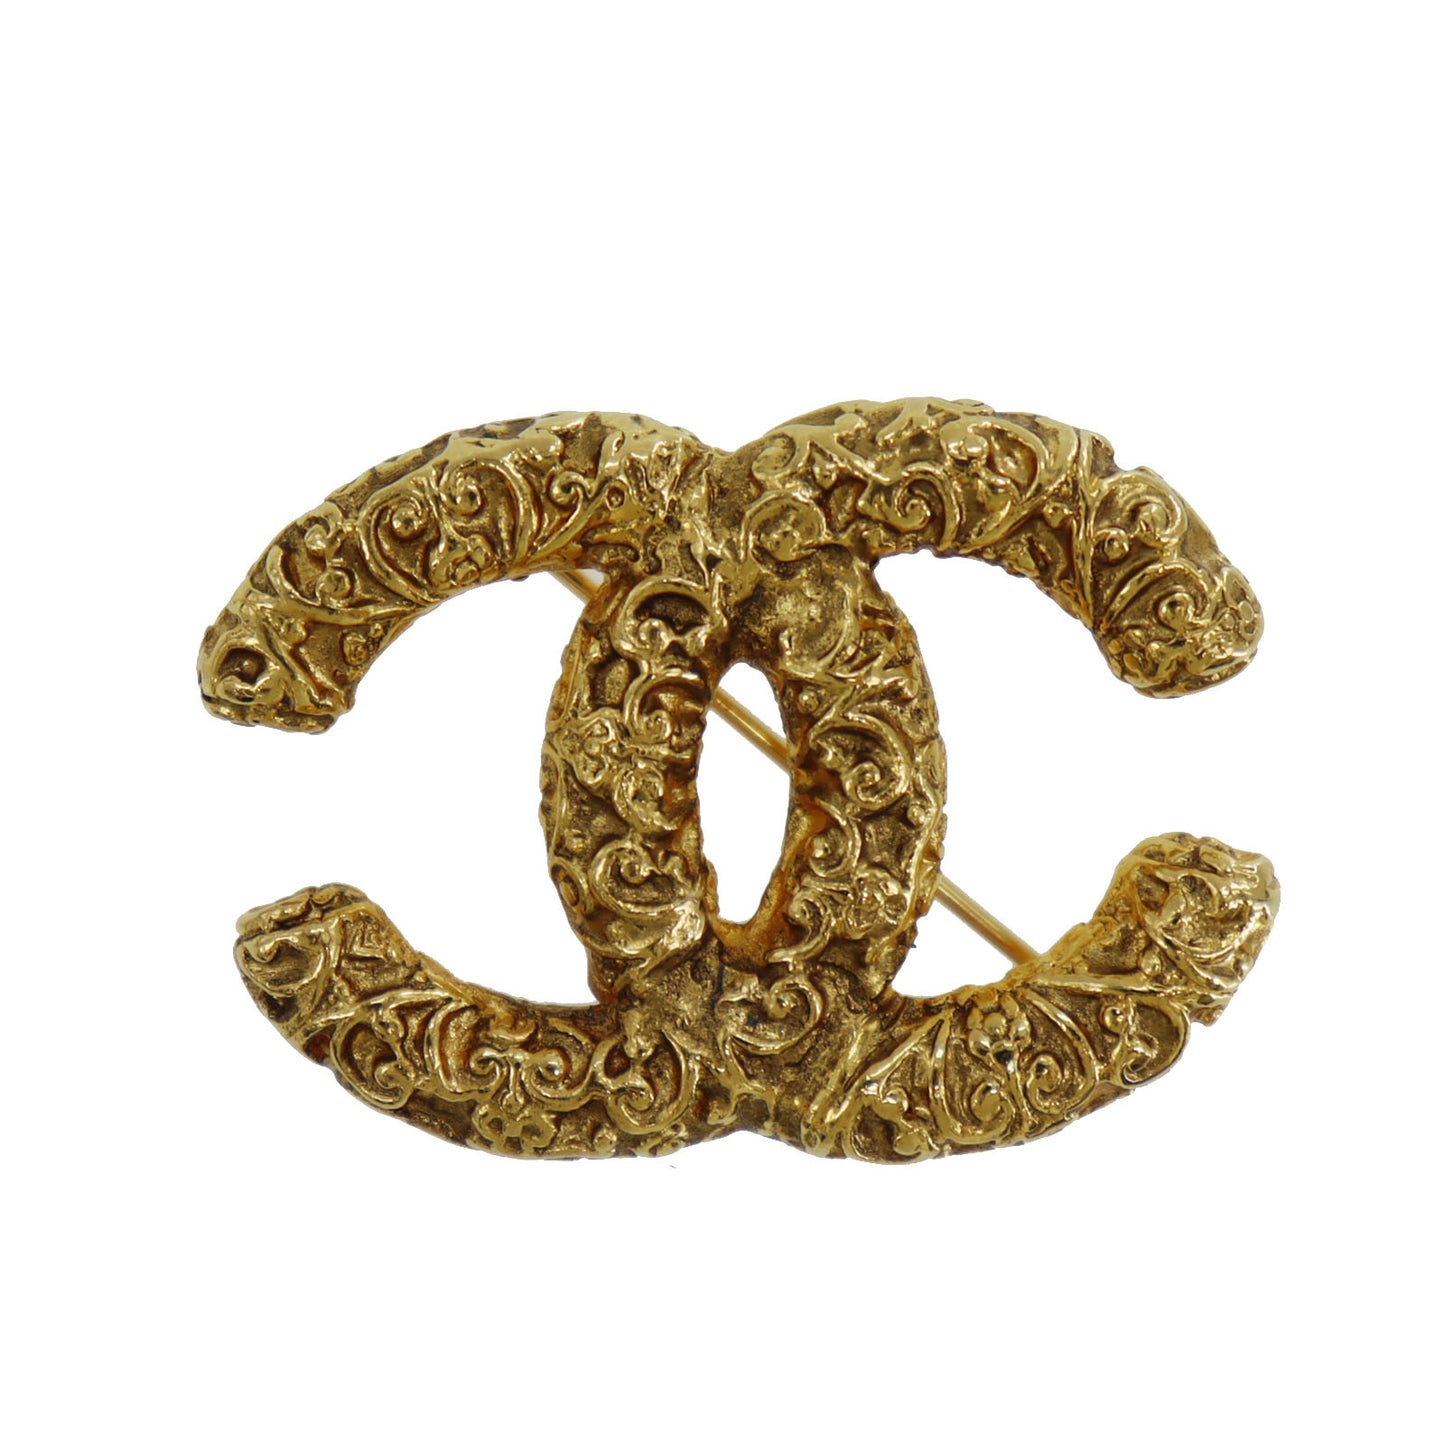 CHANEL CC Logos Pin Brooch Gold Plated 93A #CN507